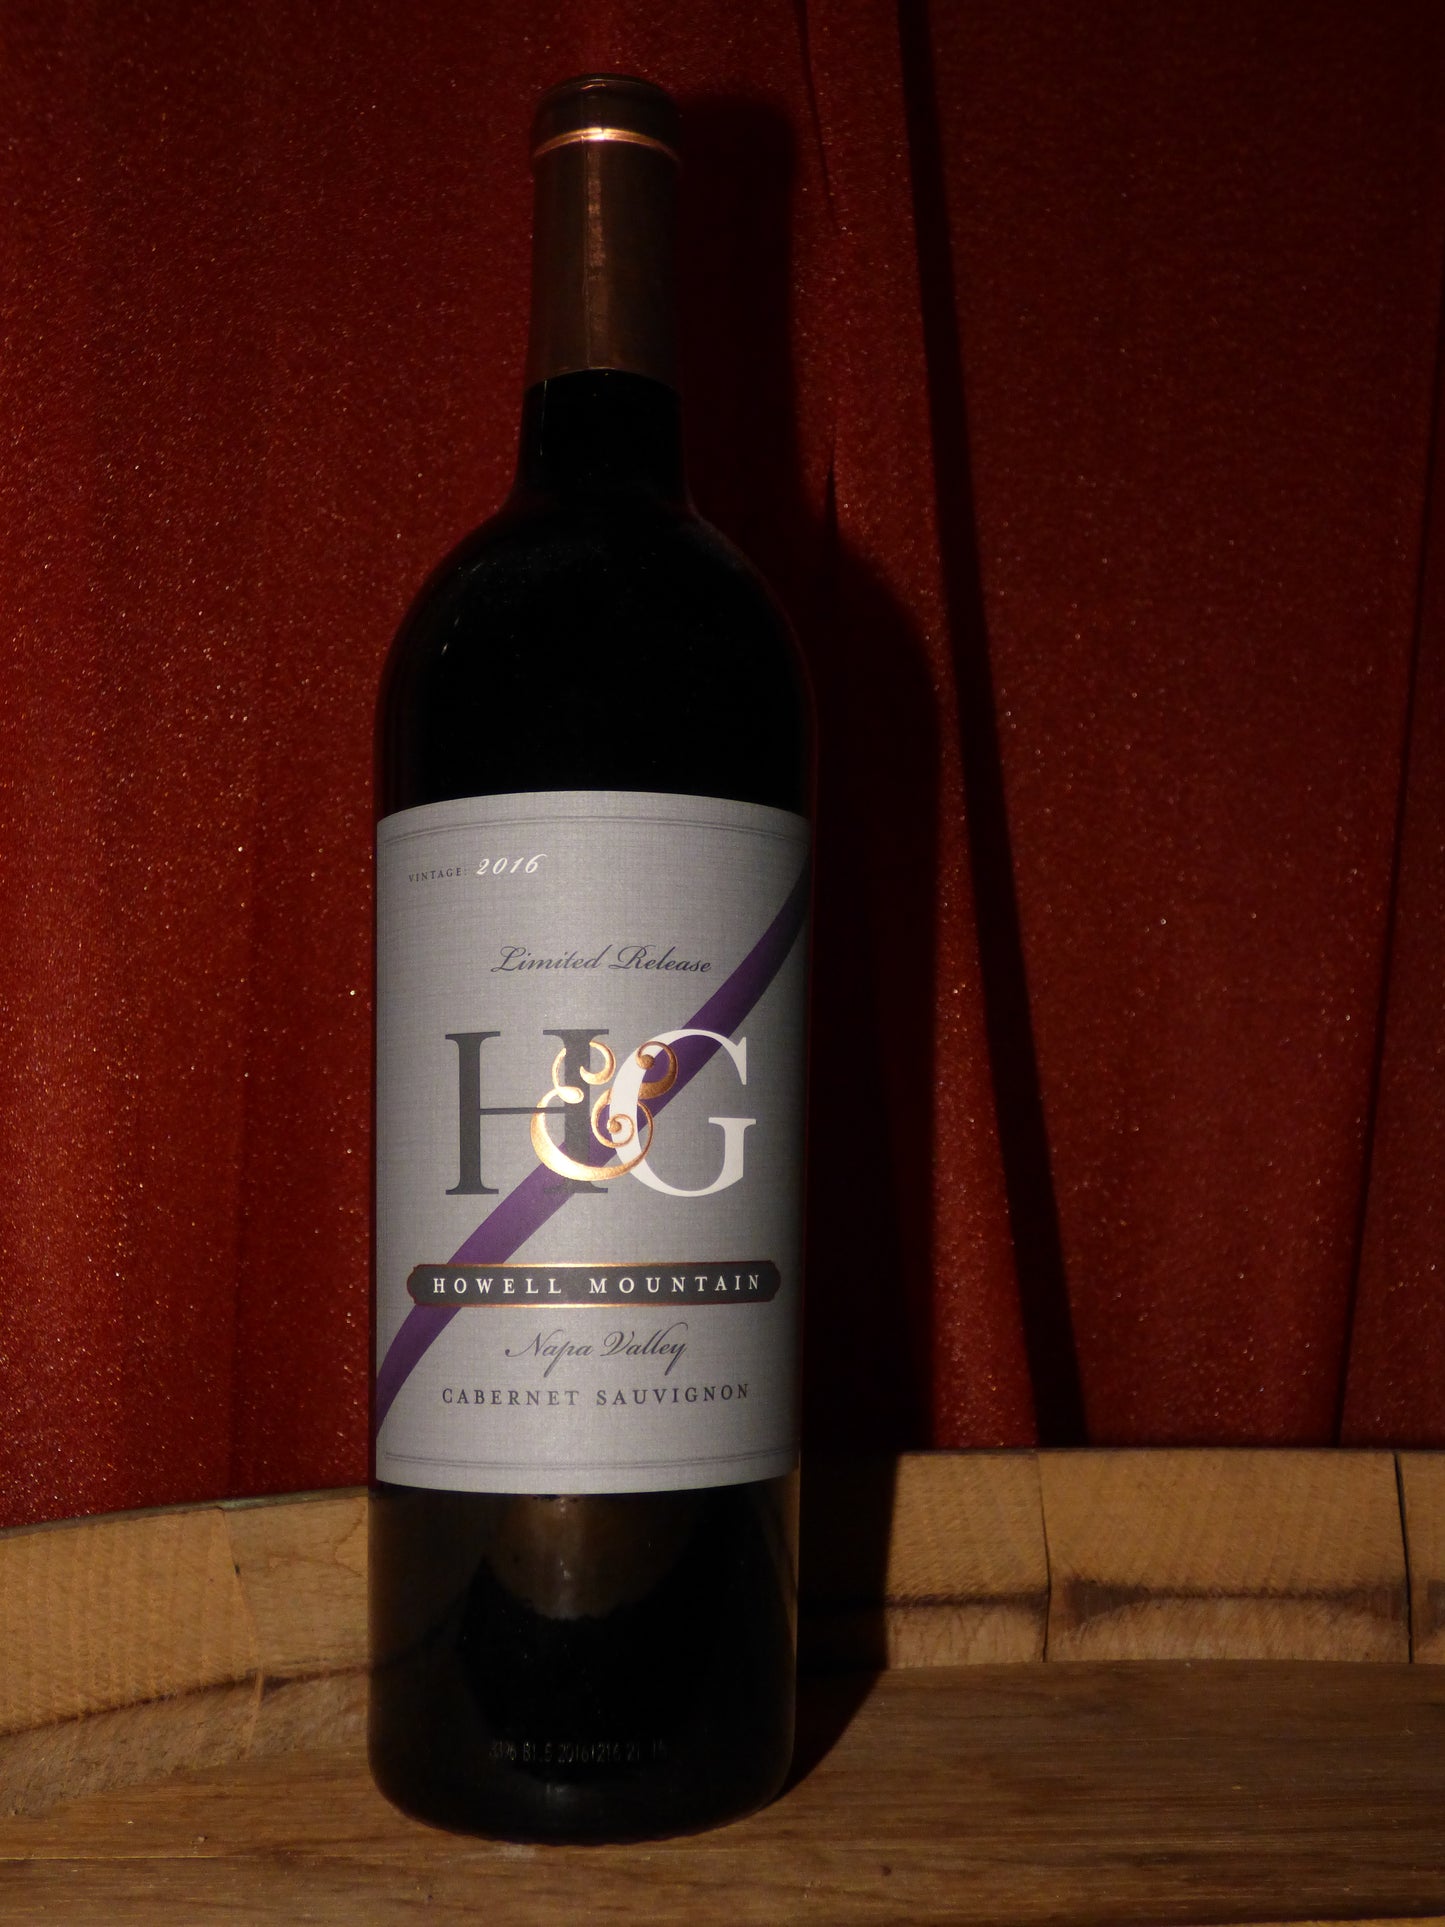 2016 H&G Limited Release Howell Mountain Cabernet Sauvignon